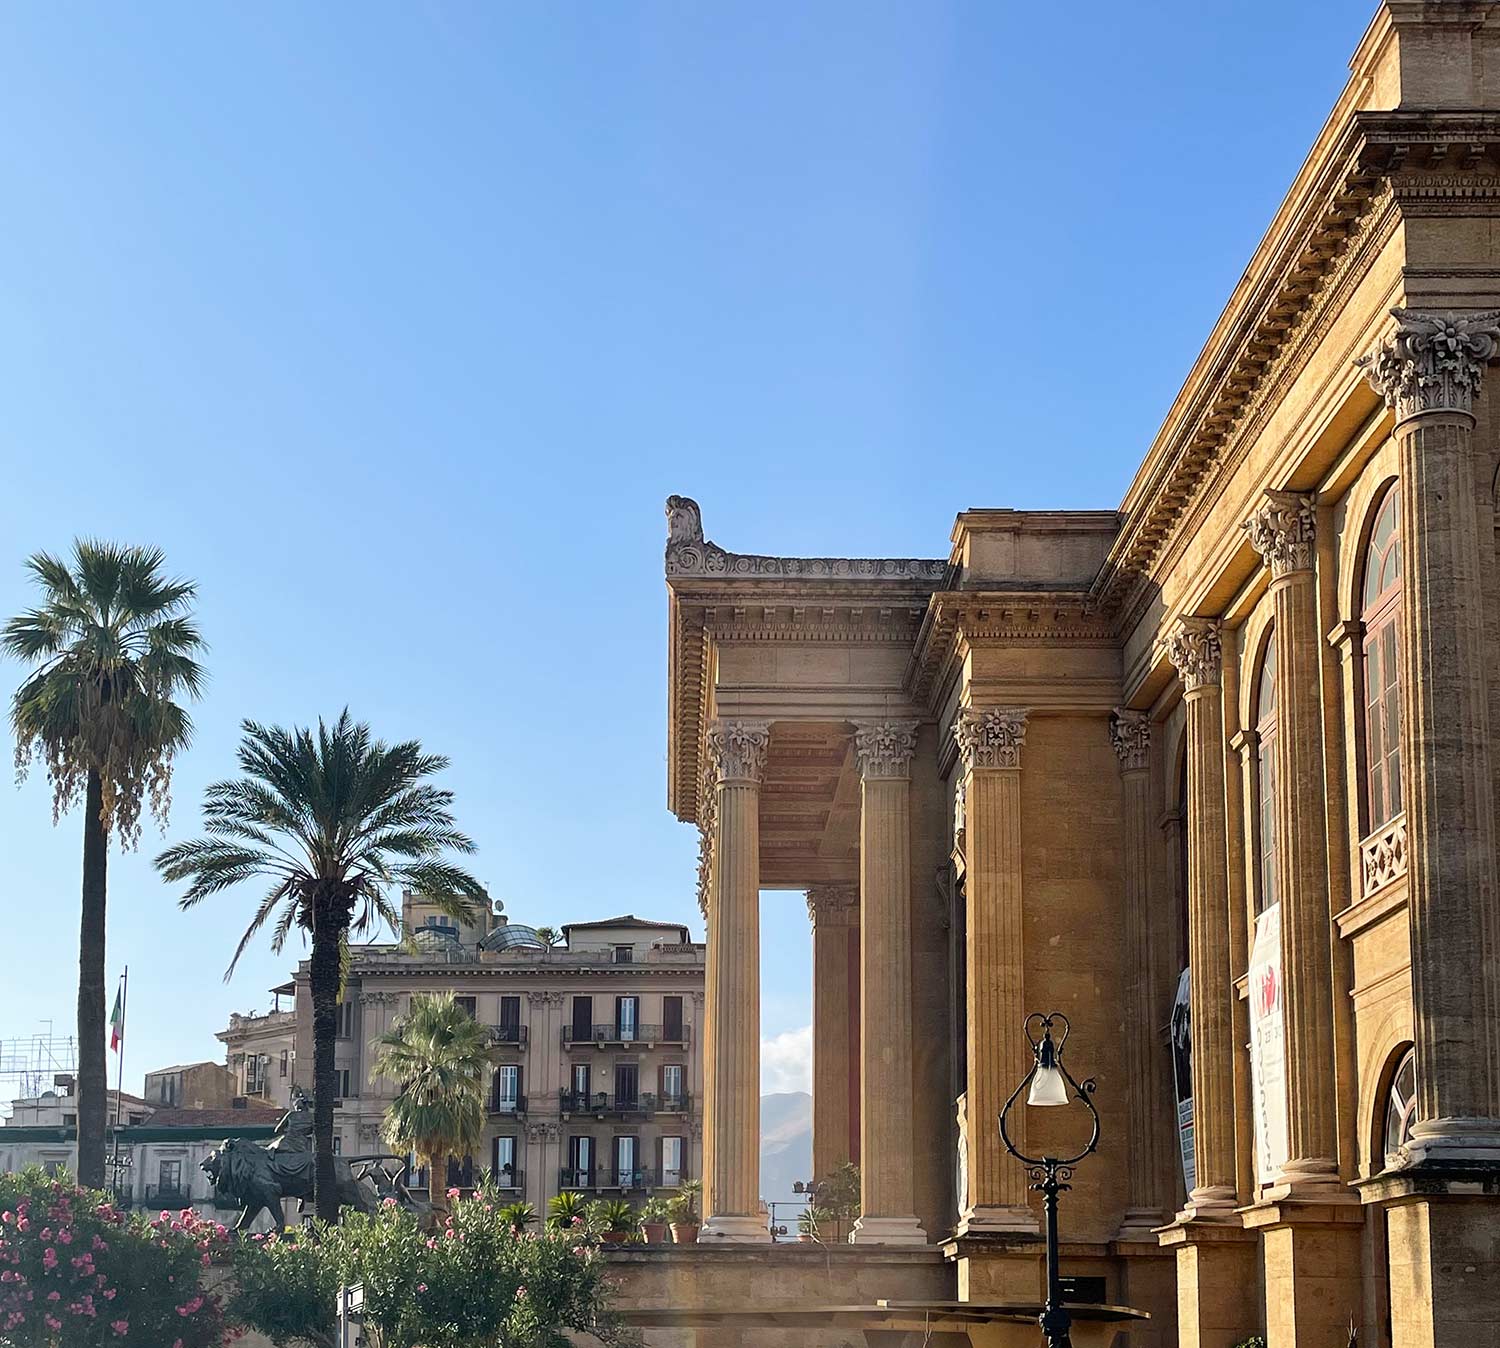 Pretty Hotels: Where to Go, Stay and Eat in Sicily (Image 1)